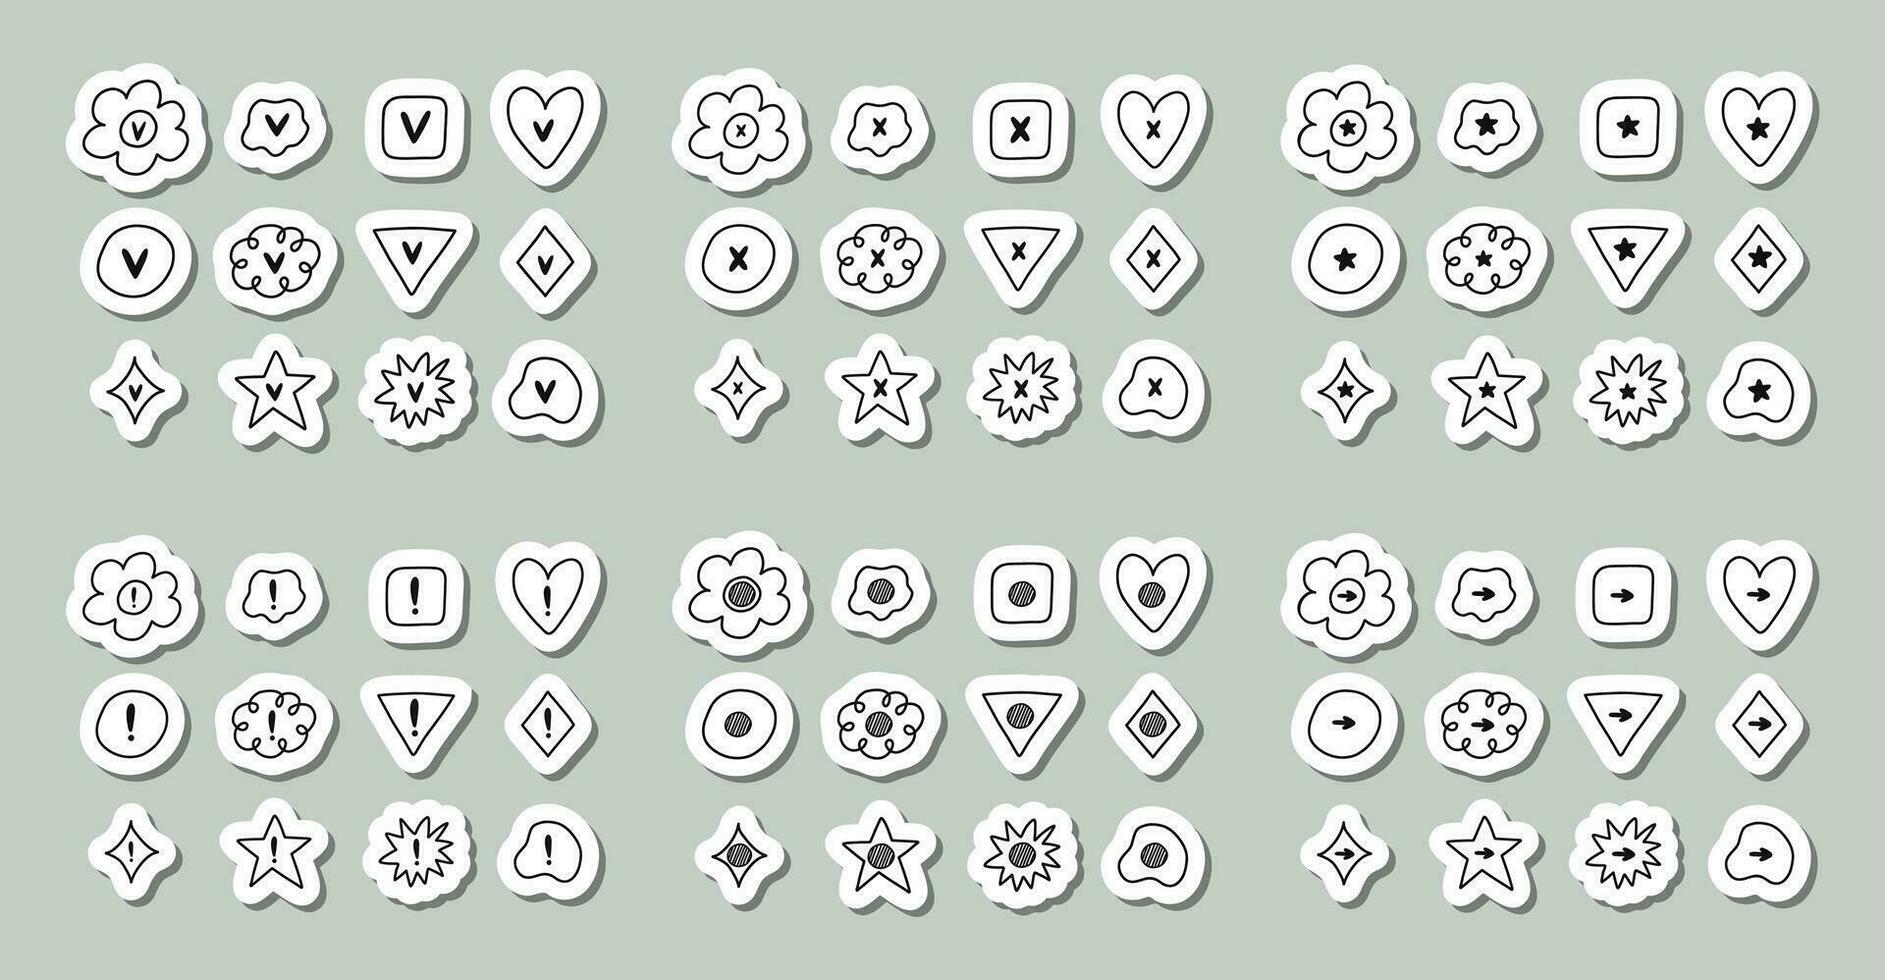 Cute hand drawn sticker set of check and cross mark set with checkboxes in the shape of flower, star, heart, circle, cloud. V, X, yes, no, ok, arrow, exclamation point, star sign for bullet journal vector